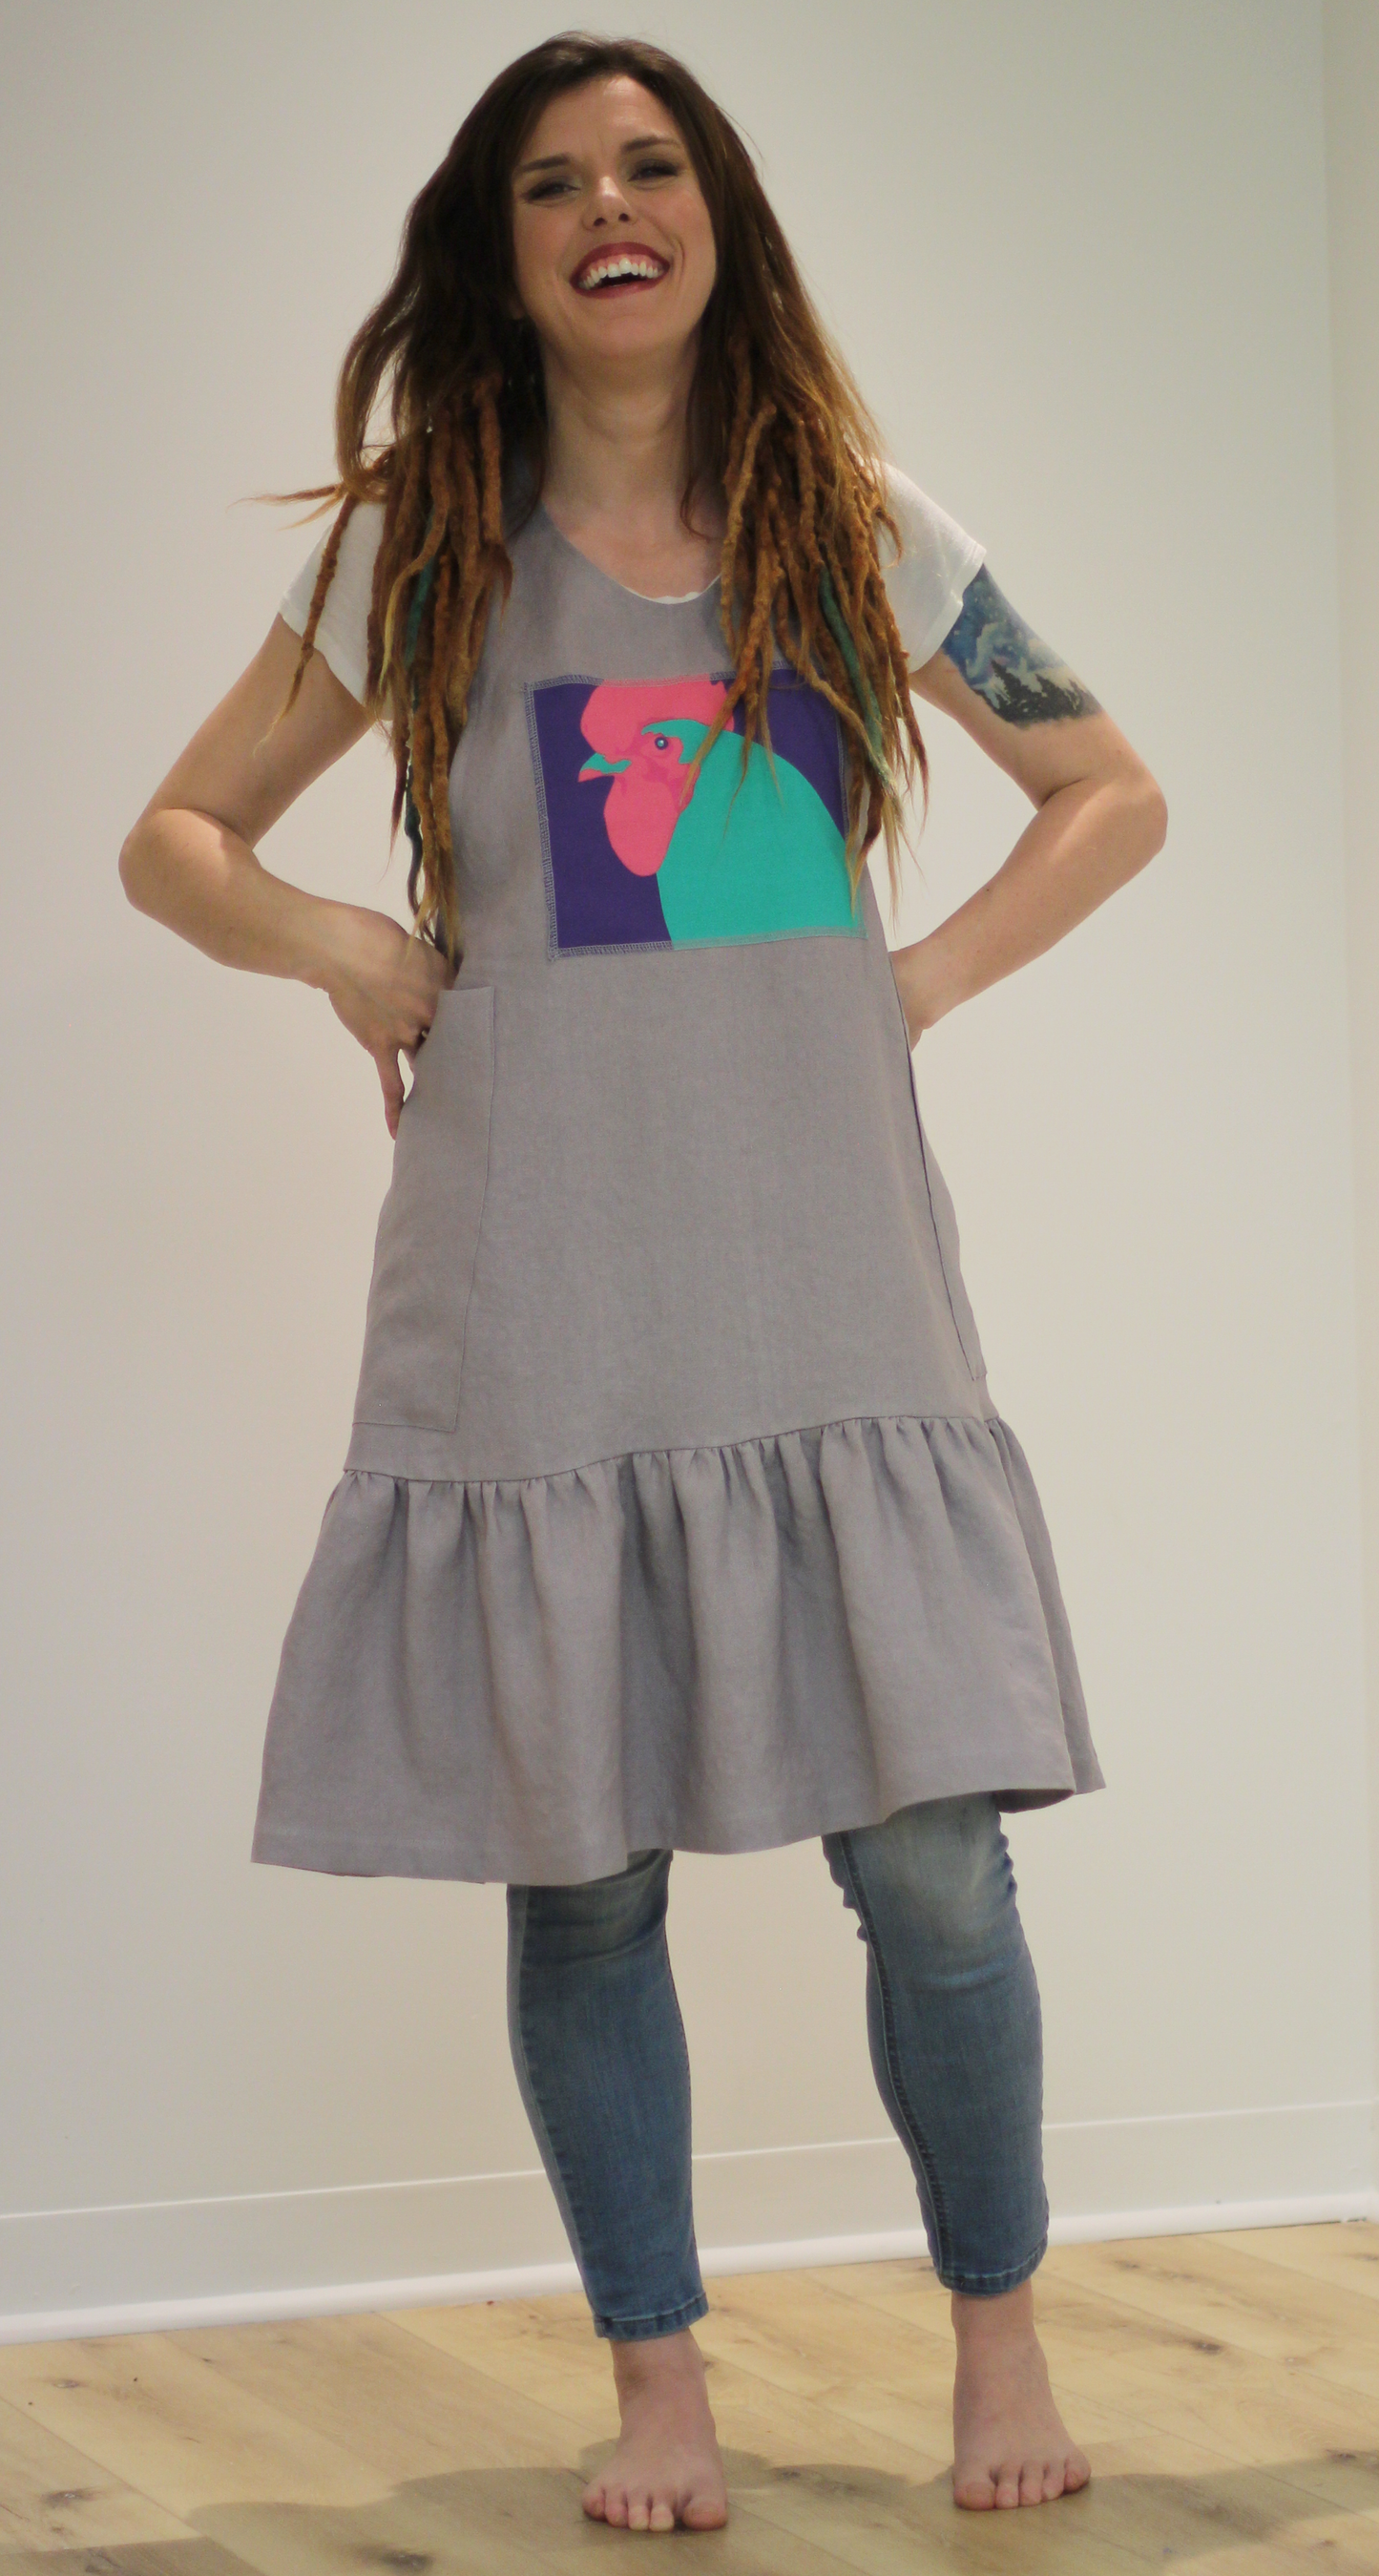 XS-5X No Tie Chicken Apron in Grey 100% Flax Linen - Front View with a happy model